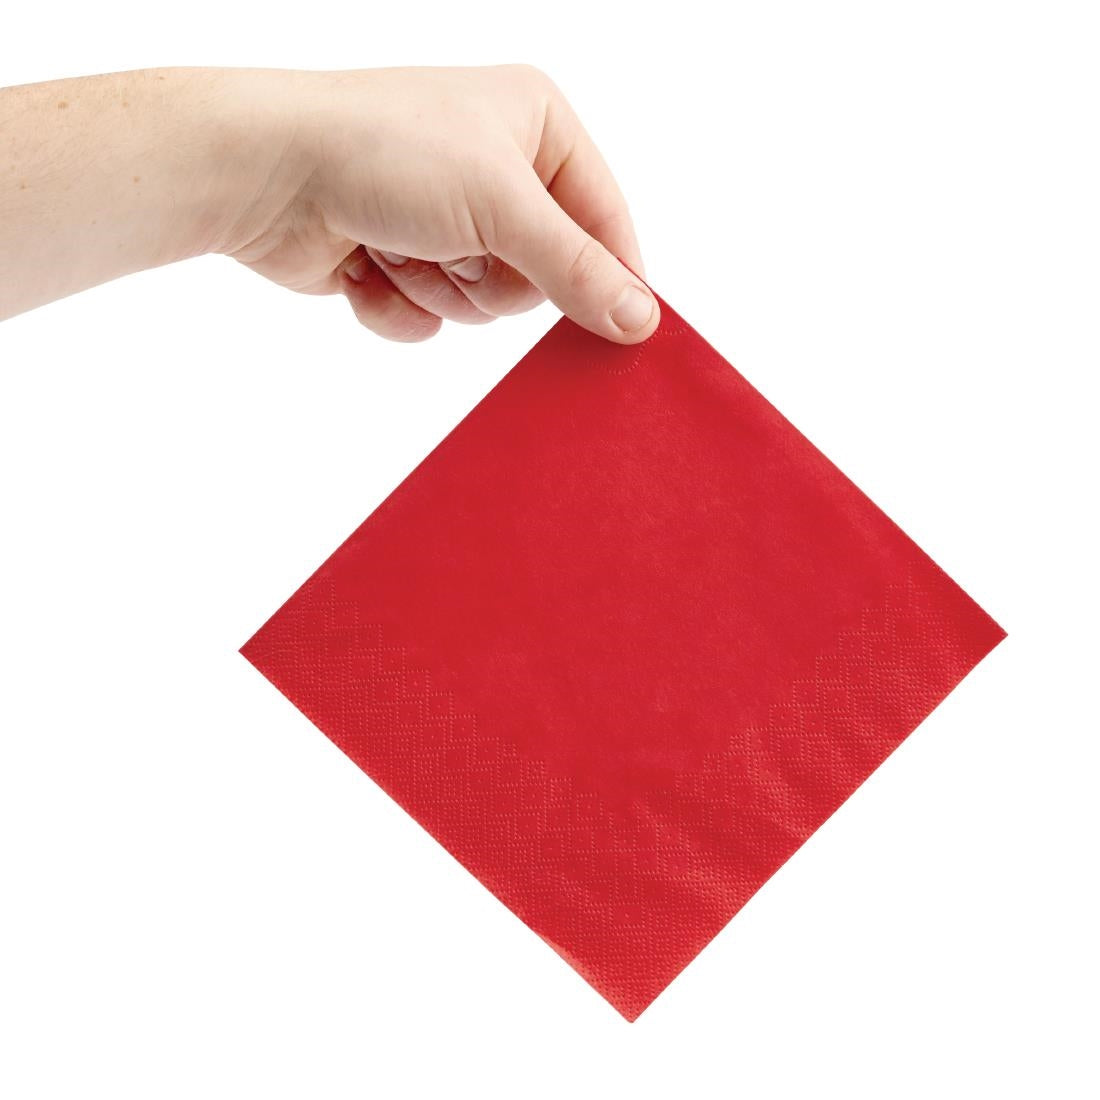 FE222 Fiesta Recyclable Lunch Napkin Red 33x33cm 2ply 1/4 Fold (Pack of 2000) JD Catering Equipment Solutions Ltd